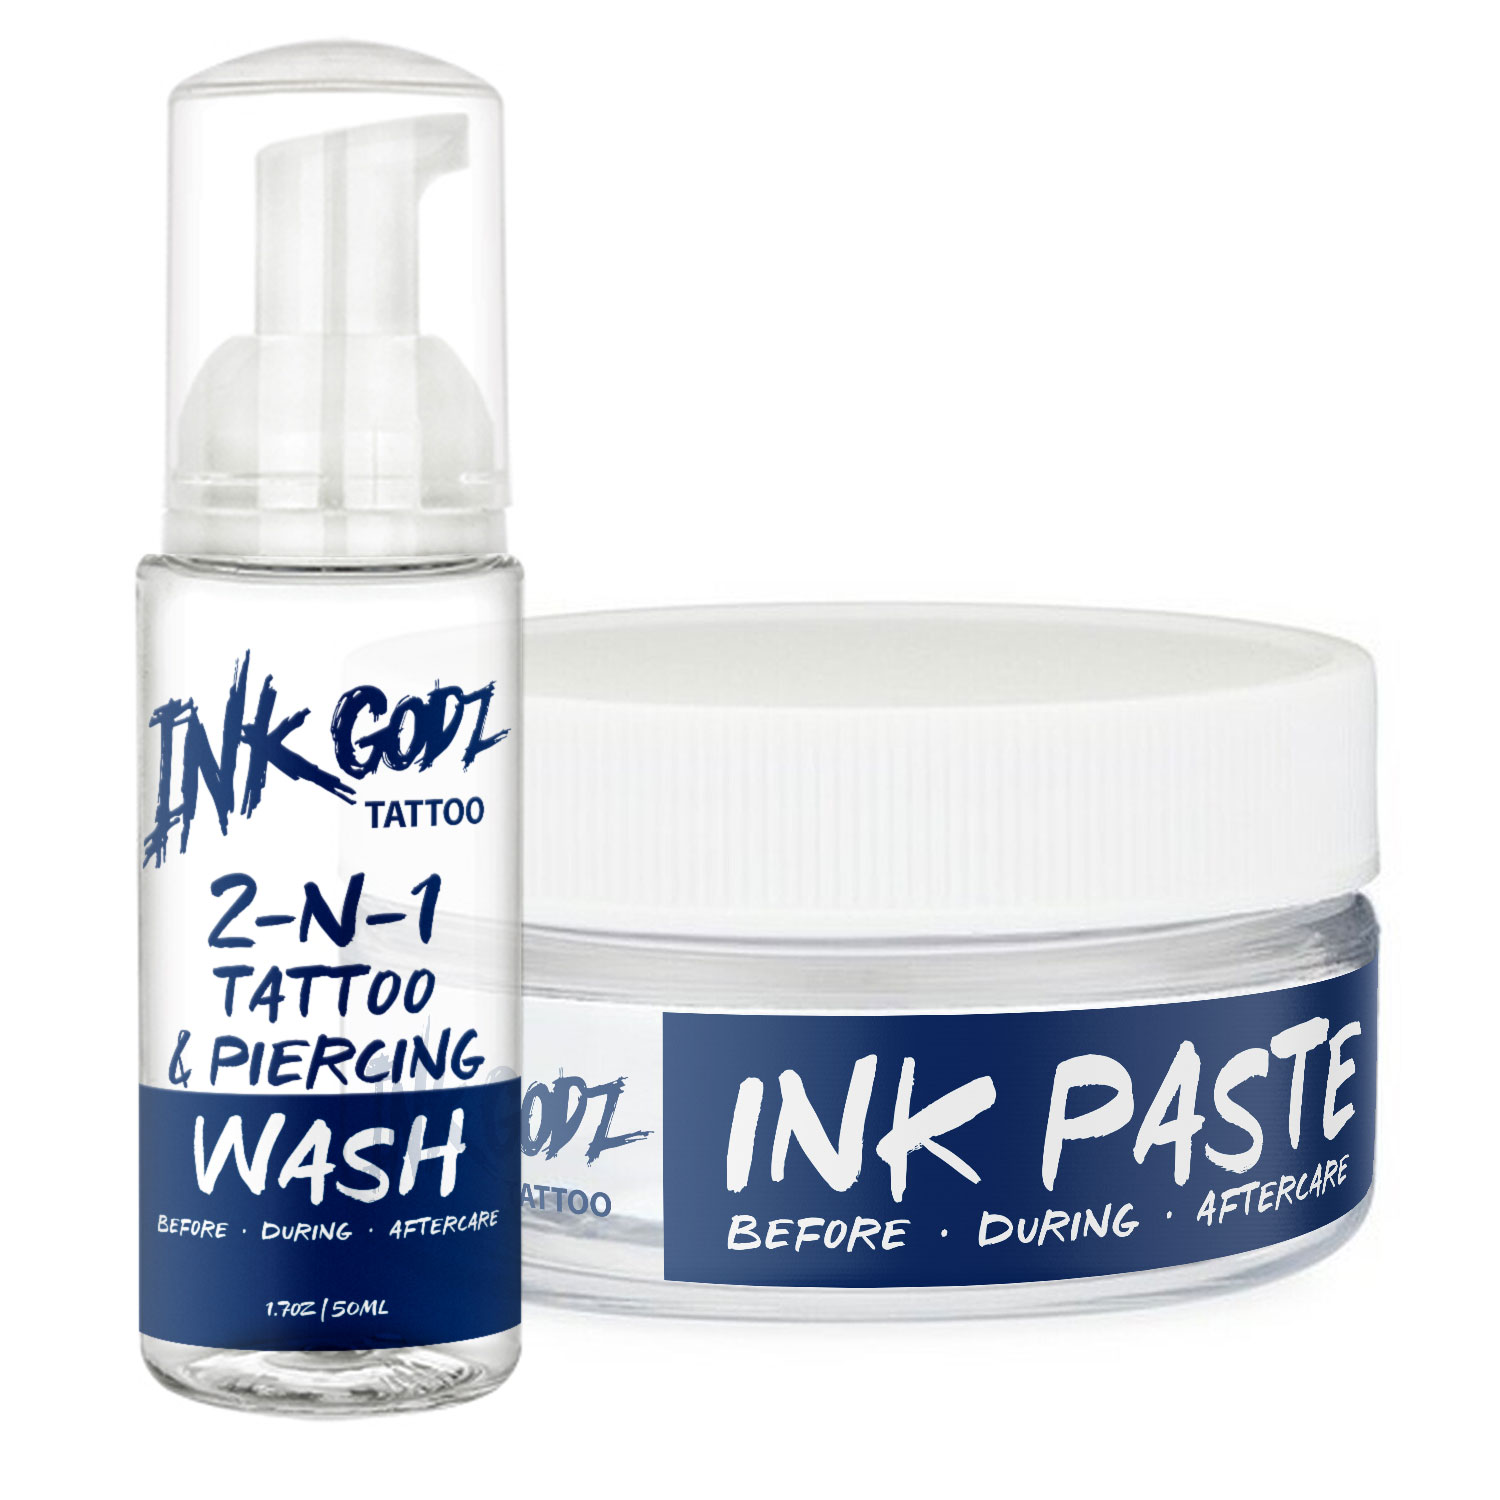 Ink Paste and Foam Wash Bundle pic